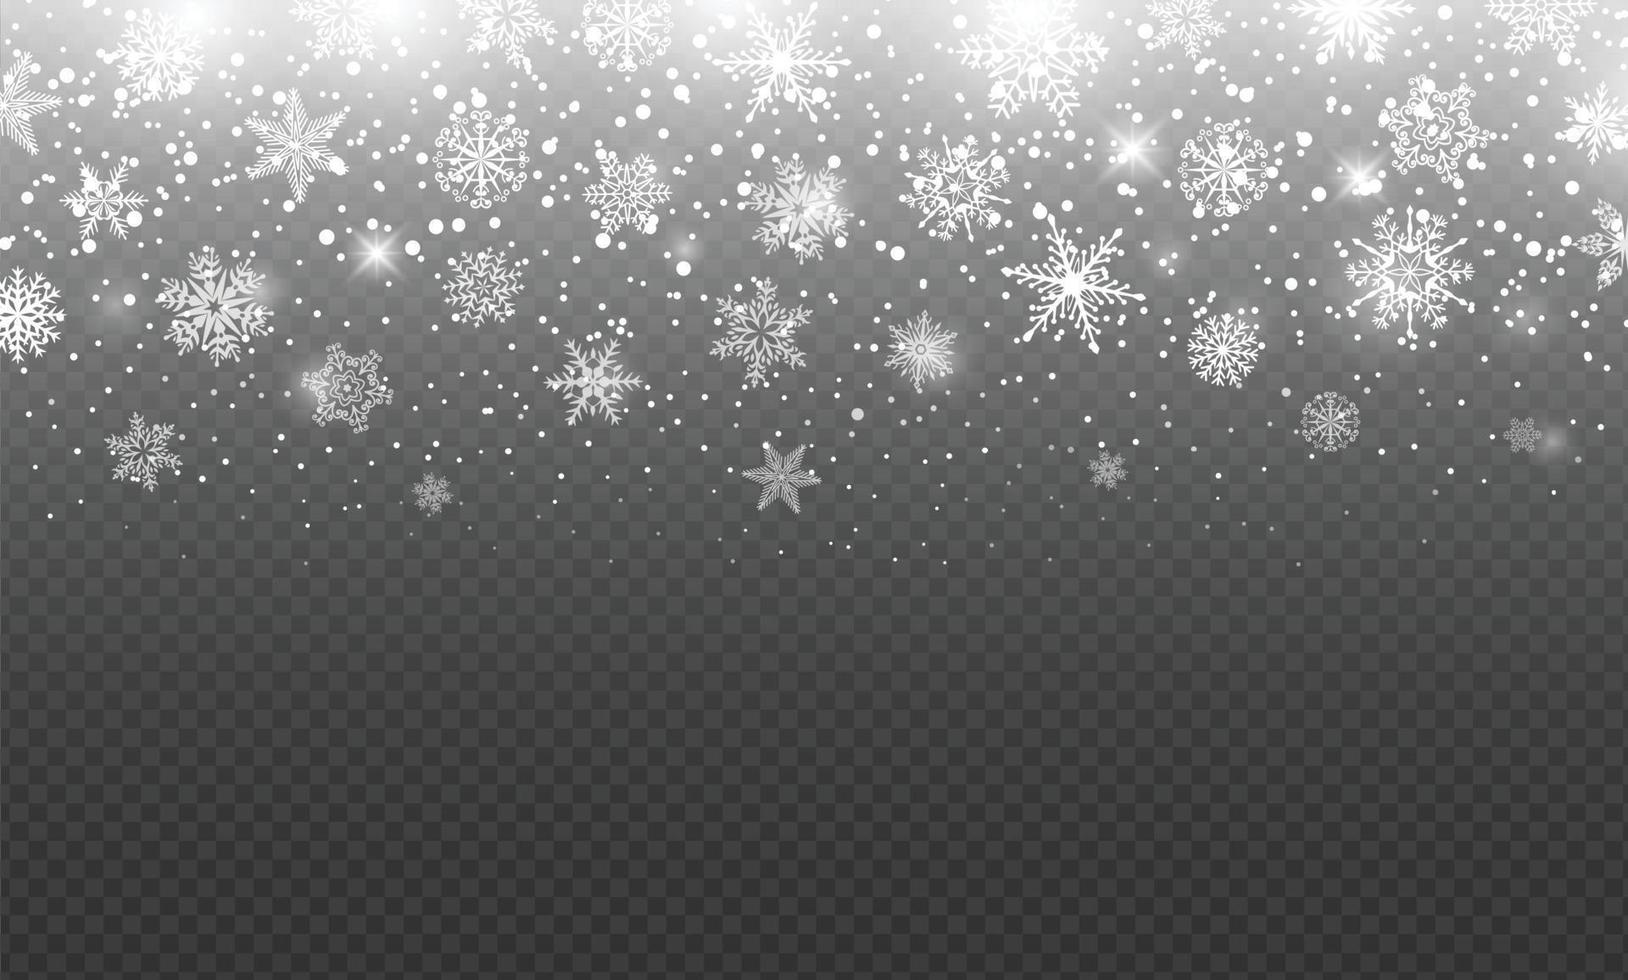 Falling snowflakes and frosted snow, heavy snowfall overlay. Christmas snowfall with ice flakes, snow crystals. Winter snowy vector background